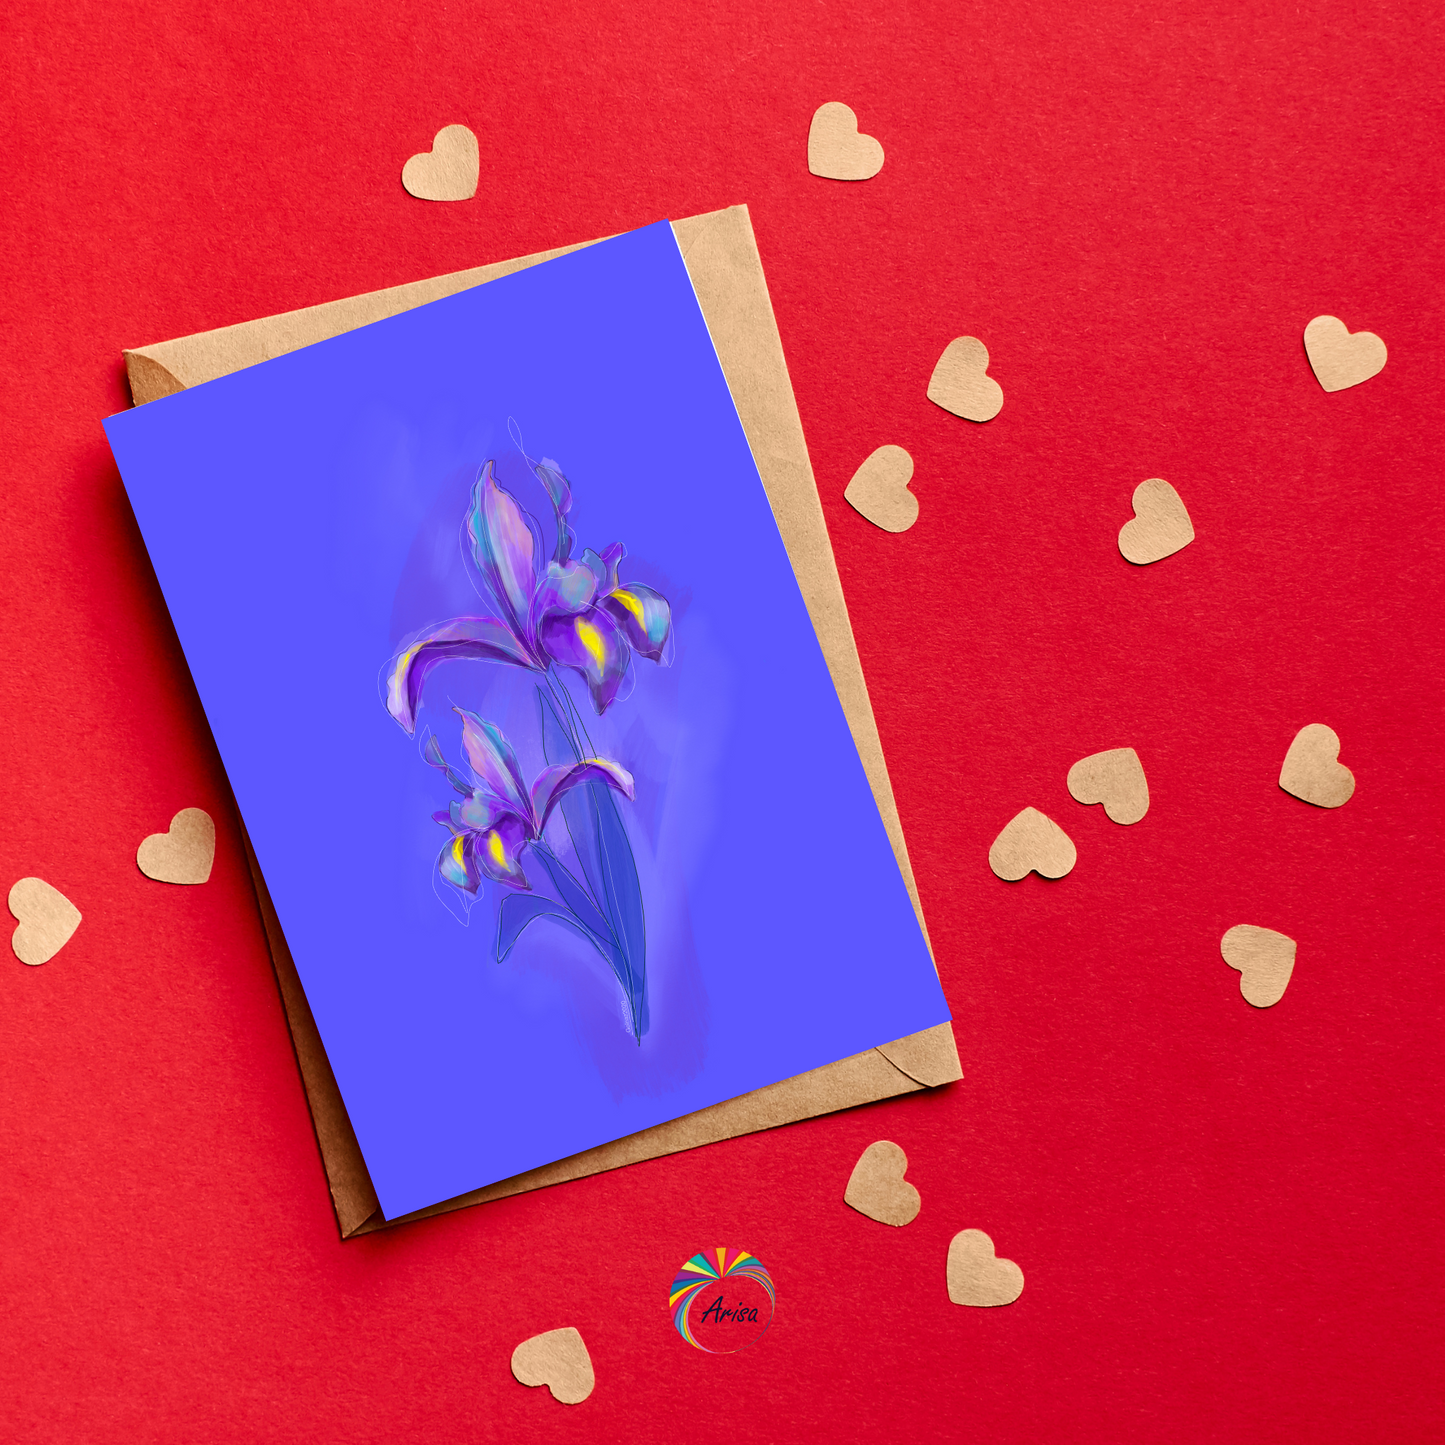 "IRIS" Greeting Card by ArisaTeam surrounded by small hearts in a red background ideal as a Valentine card.